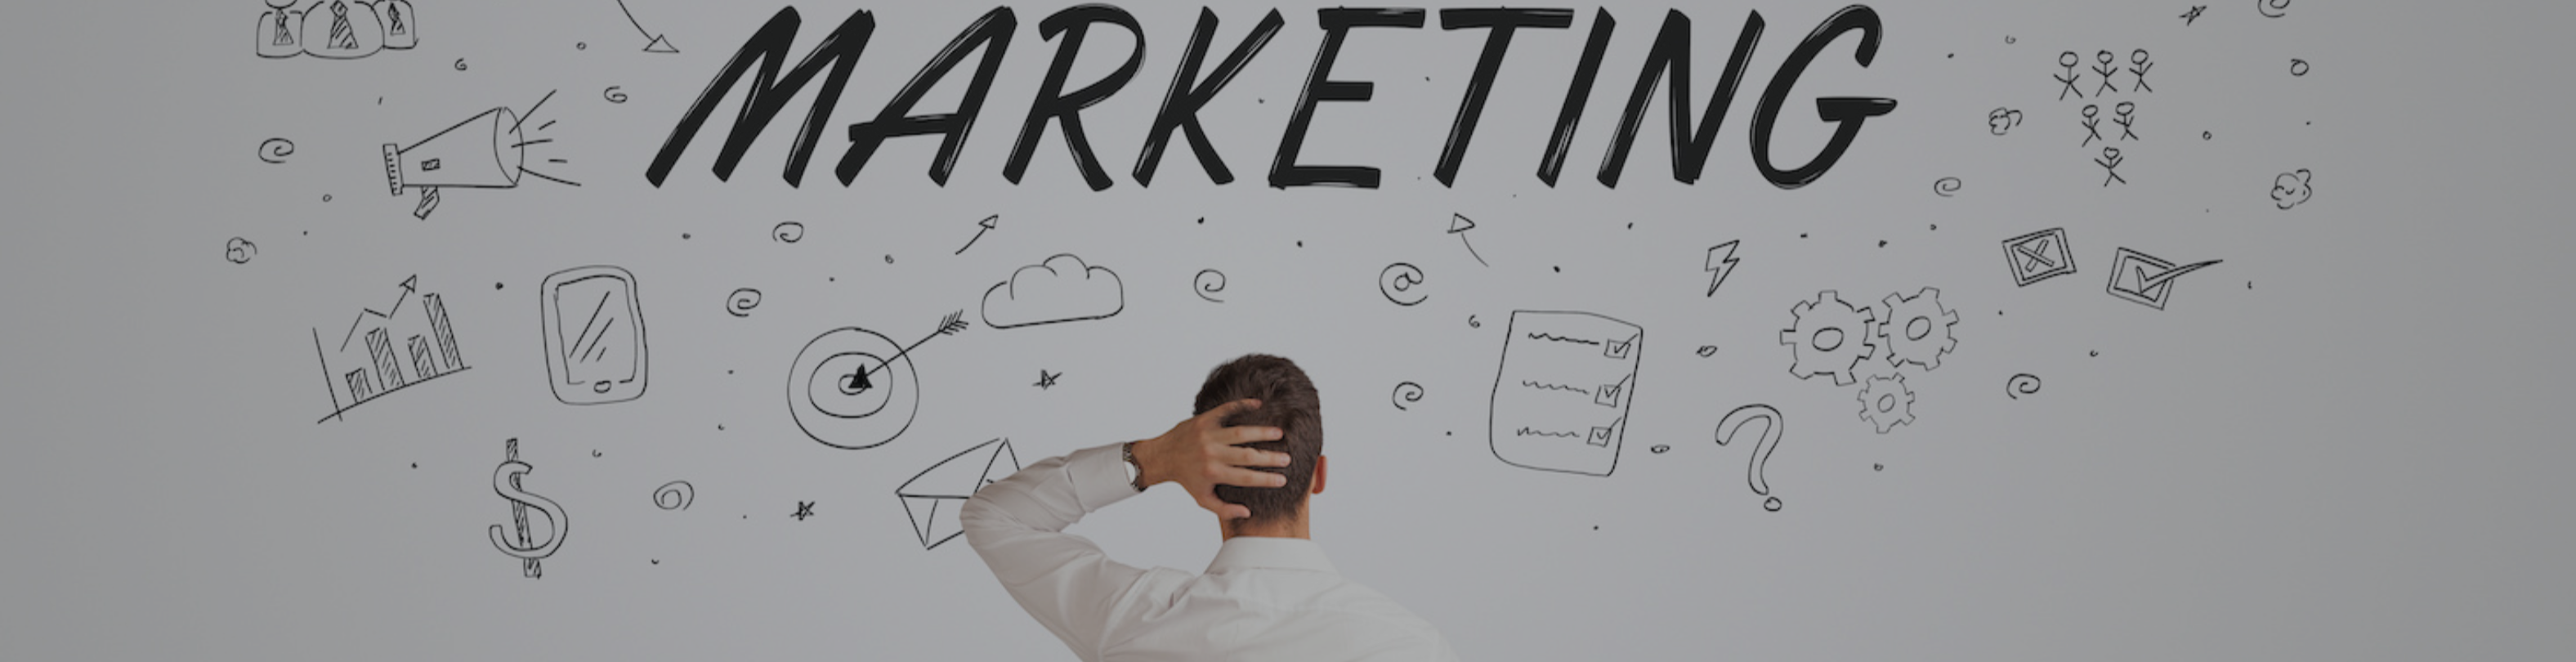 2 Marketing Challenges Small Businesses Face